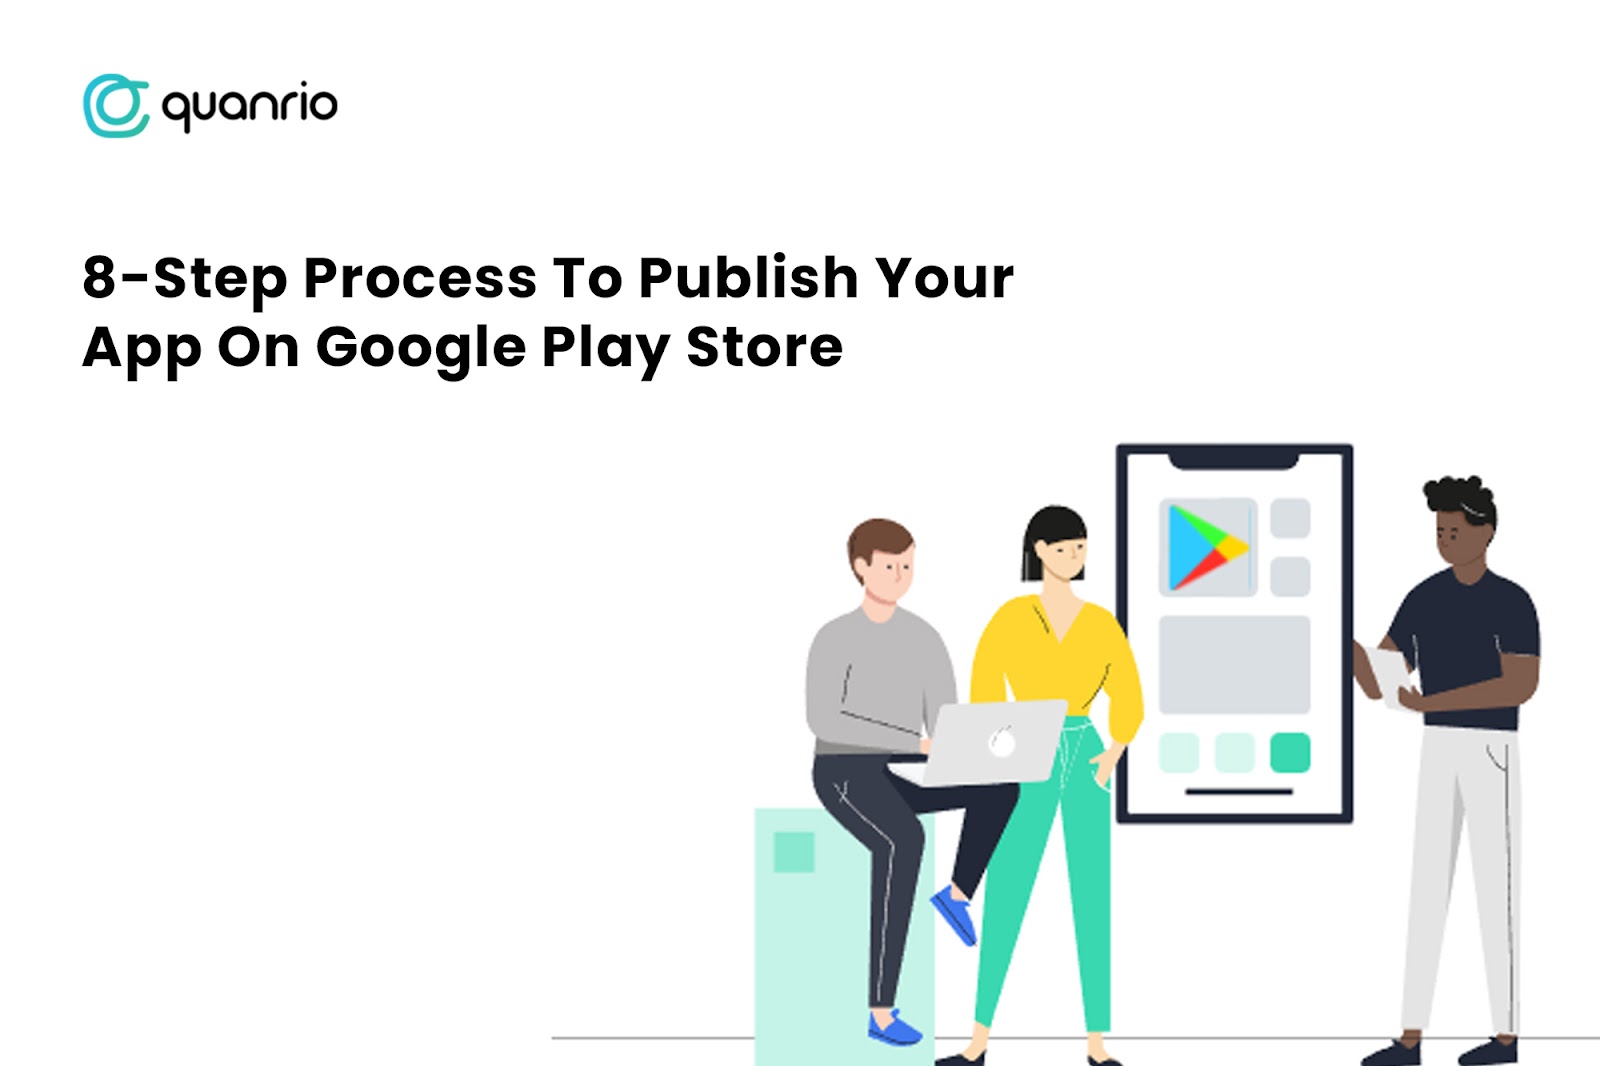 8-Step Process To Publish Your App On Google Play Store